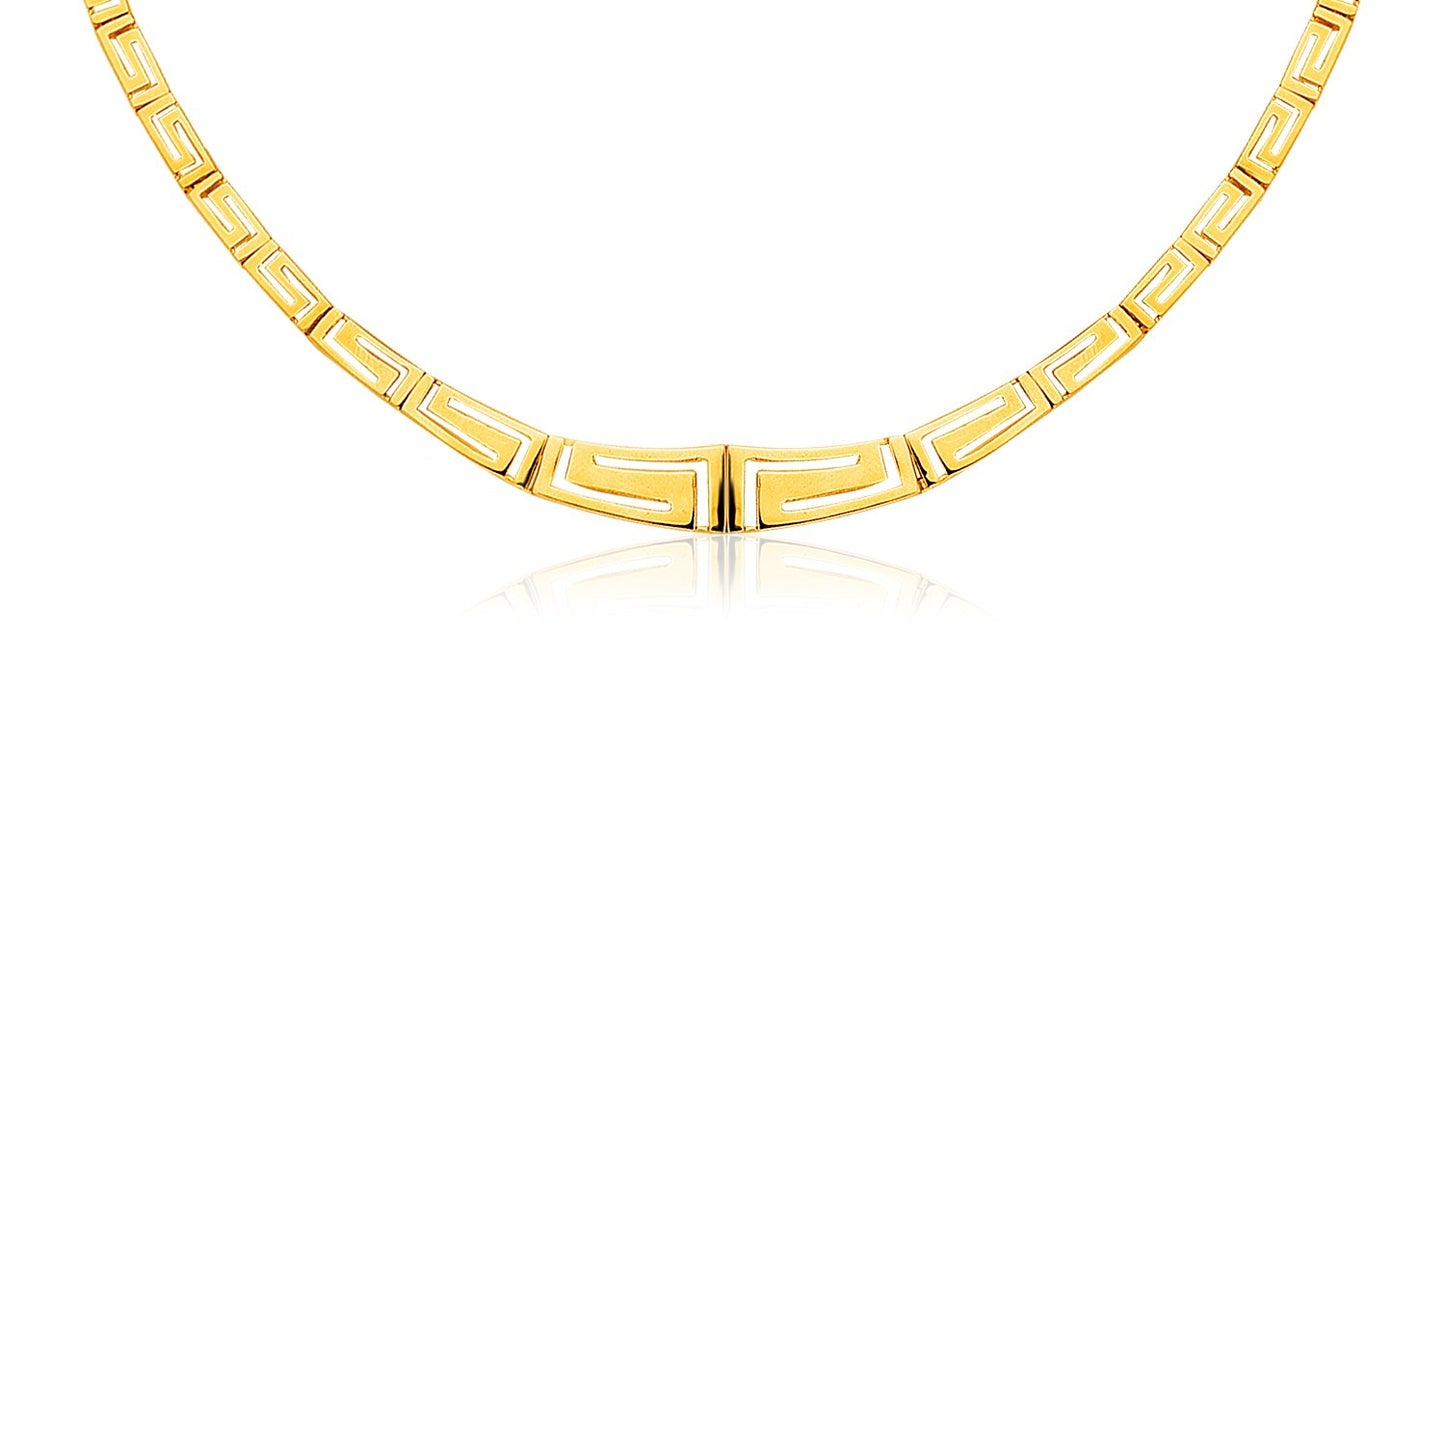 14K Yellow Gold Necklace with Graduated Greek Meander Motif Links